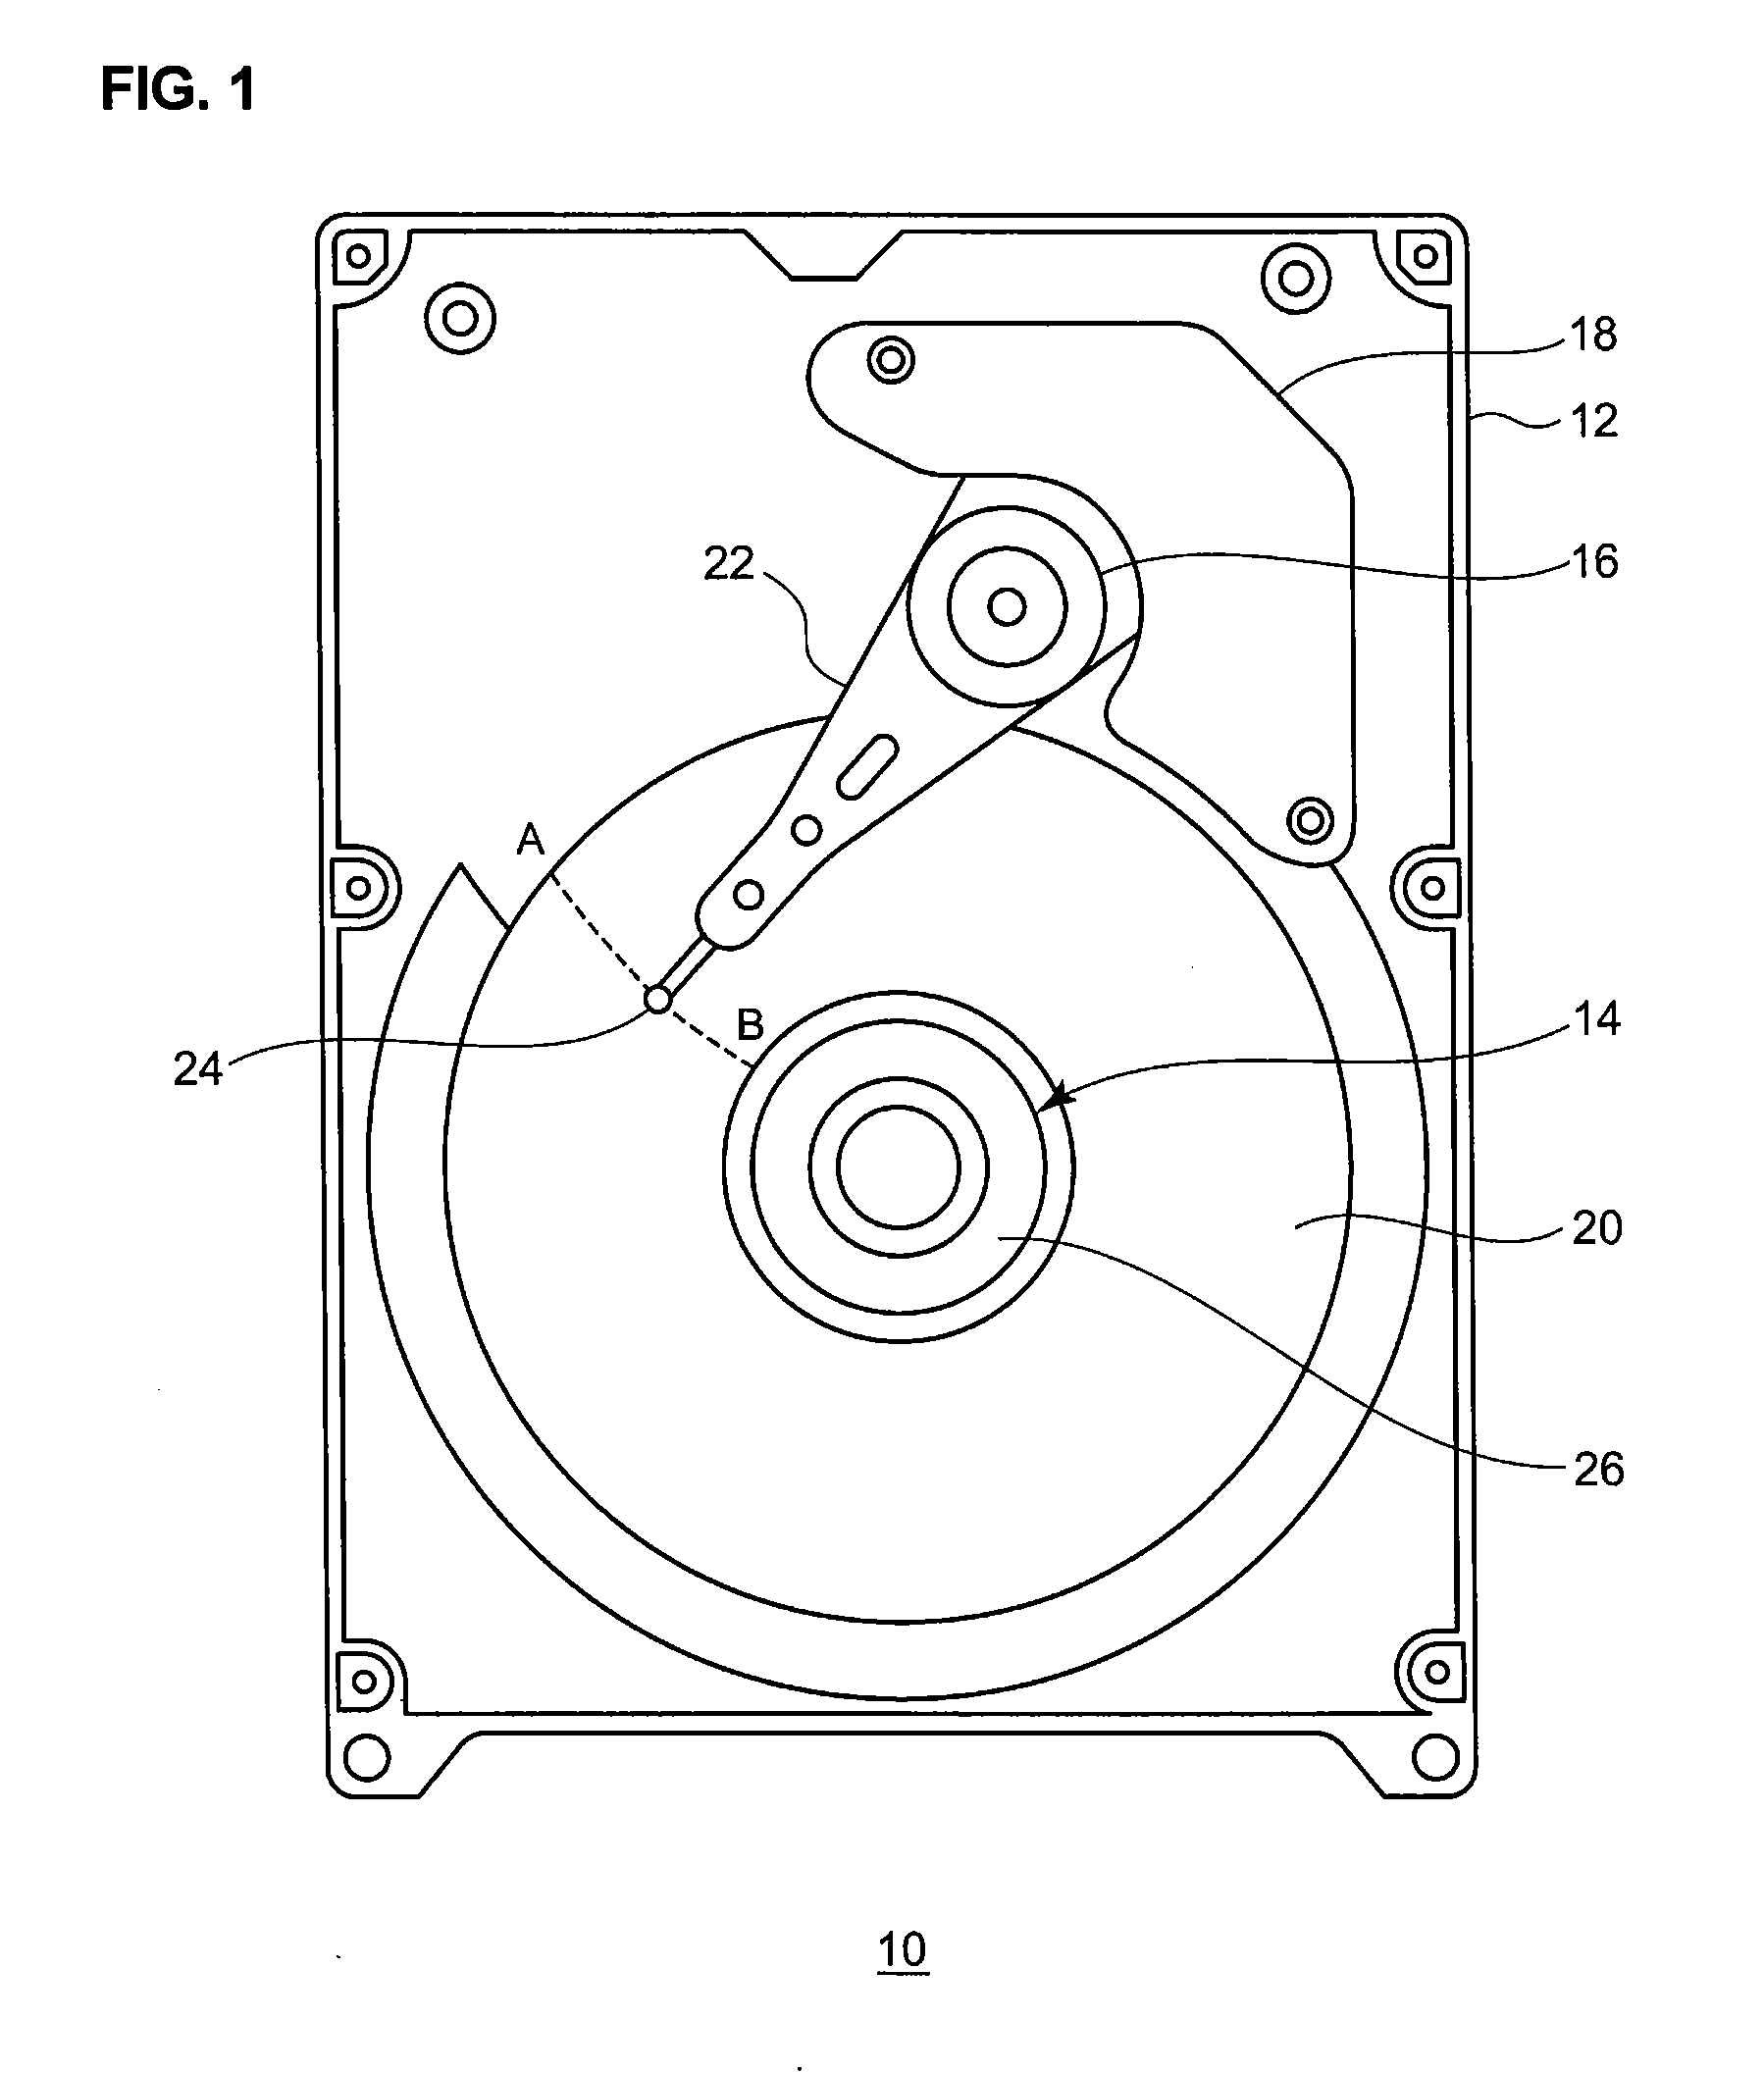 Method of manufacturing a disk drive device having base member, bearing unit, drive unit and hub, and disk drive device manufactured by the manufacturing method